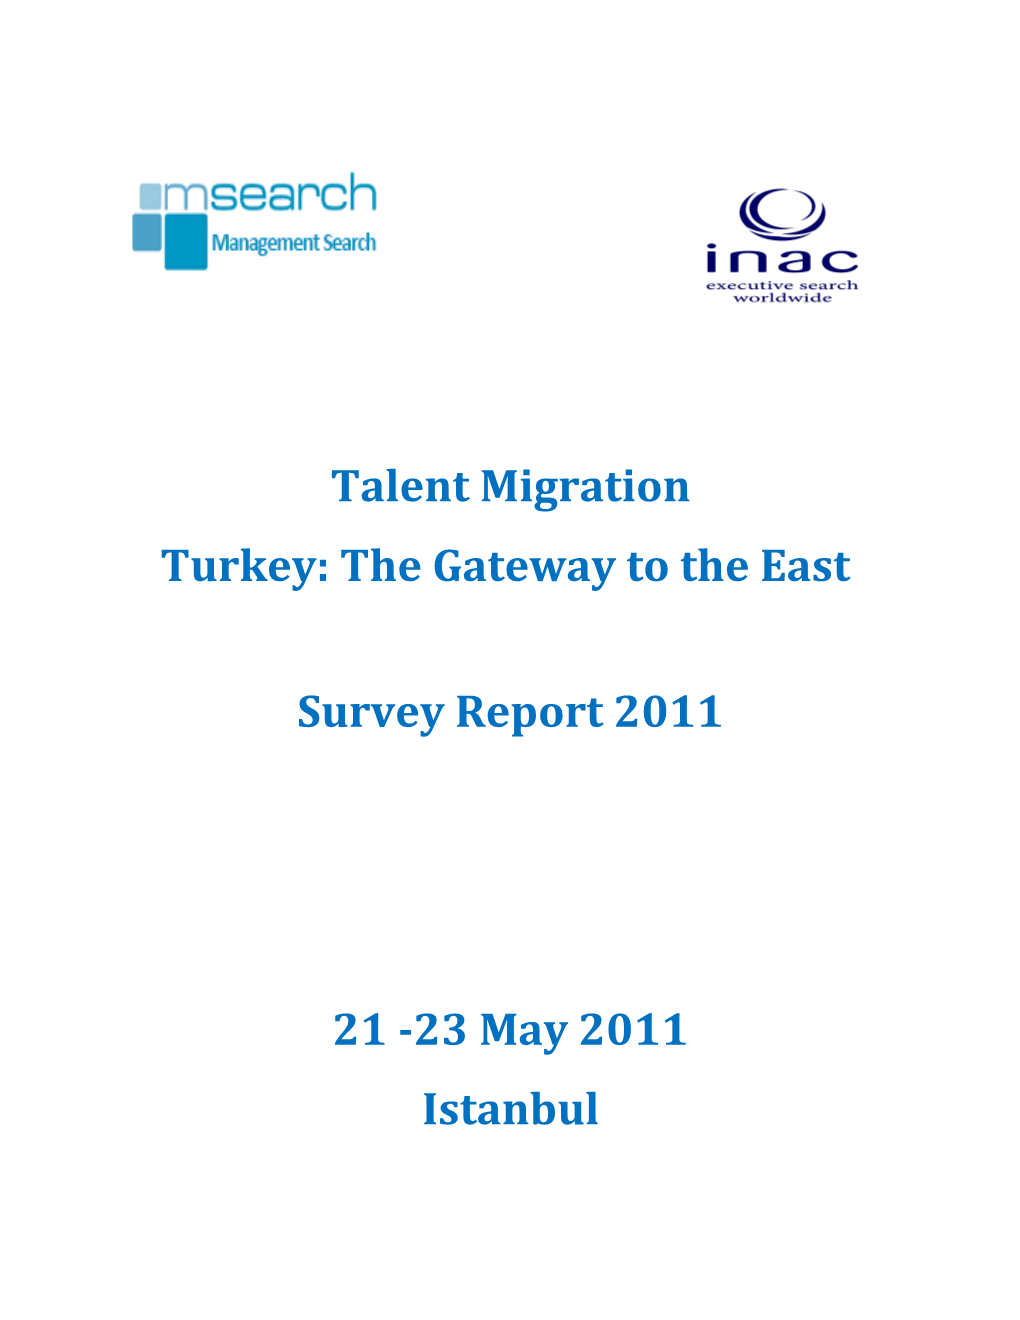 Turkey: the Gateway to the East Survey Report 2011